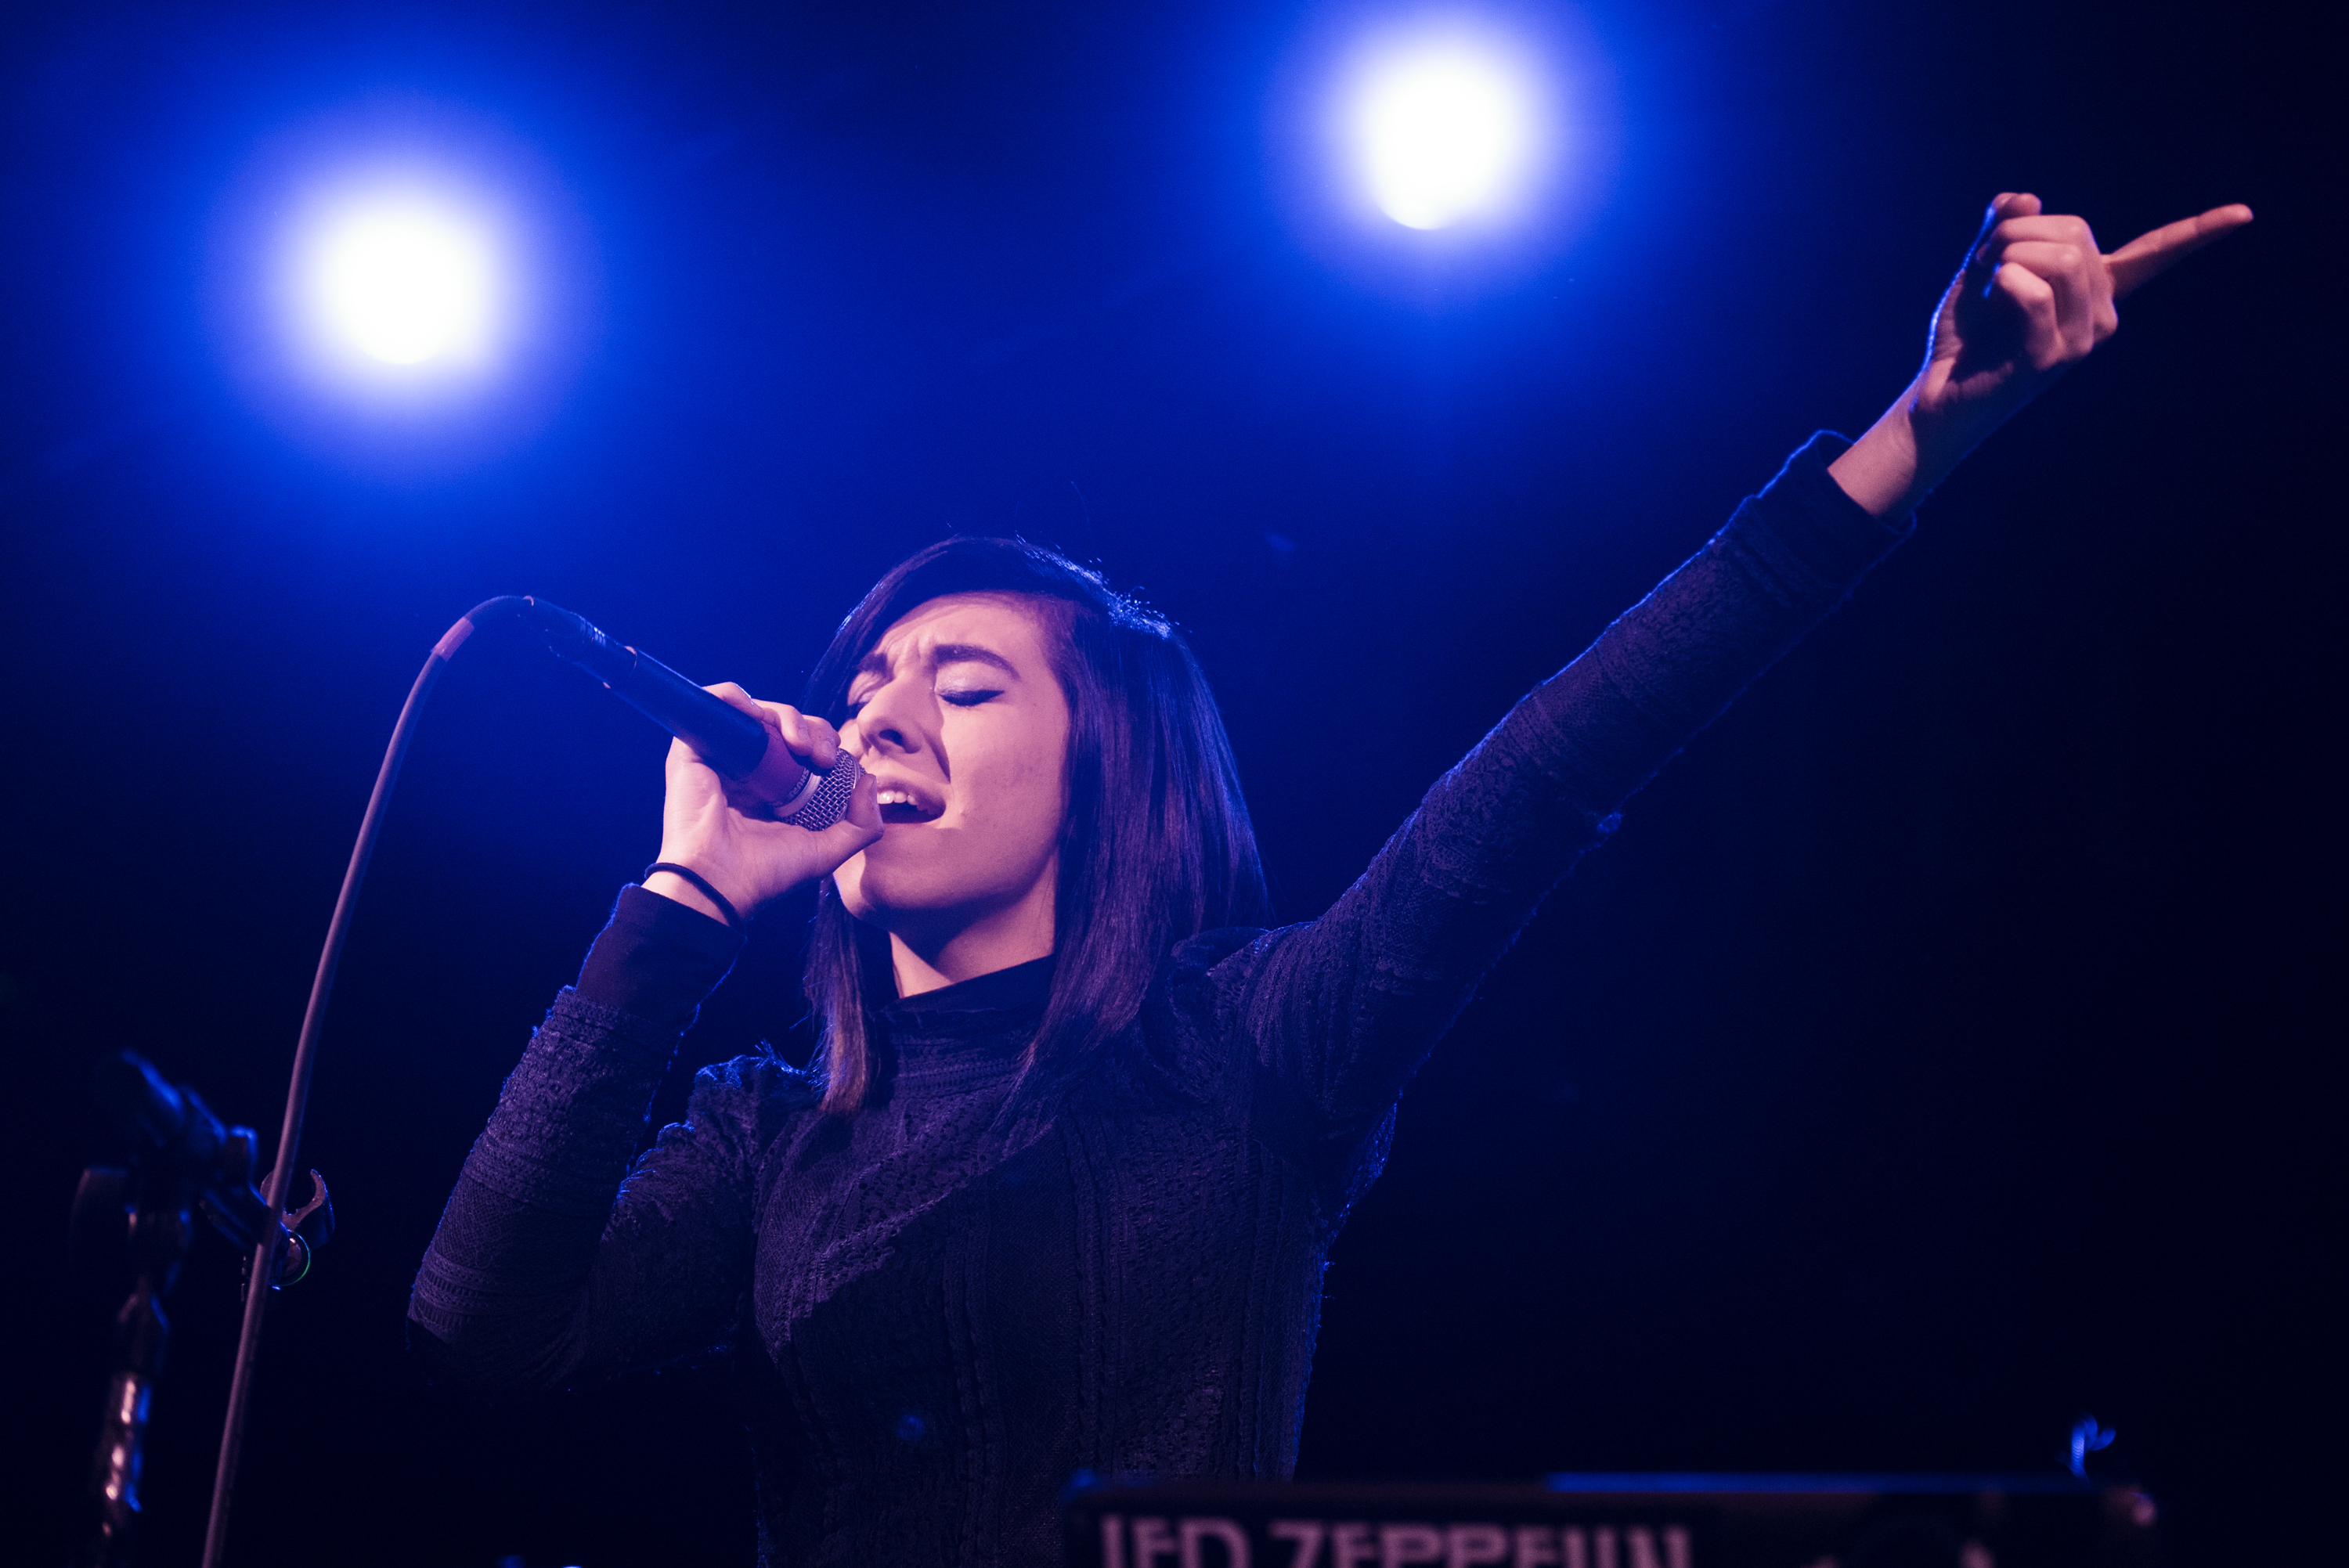 Singer Christina Grimmie performs in concert at Irving Plaza on March 10, 2016 in New York City. (Noam Galai/Getty Images)